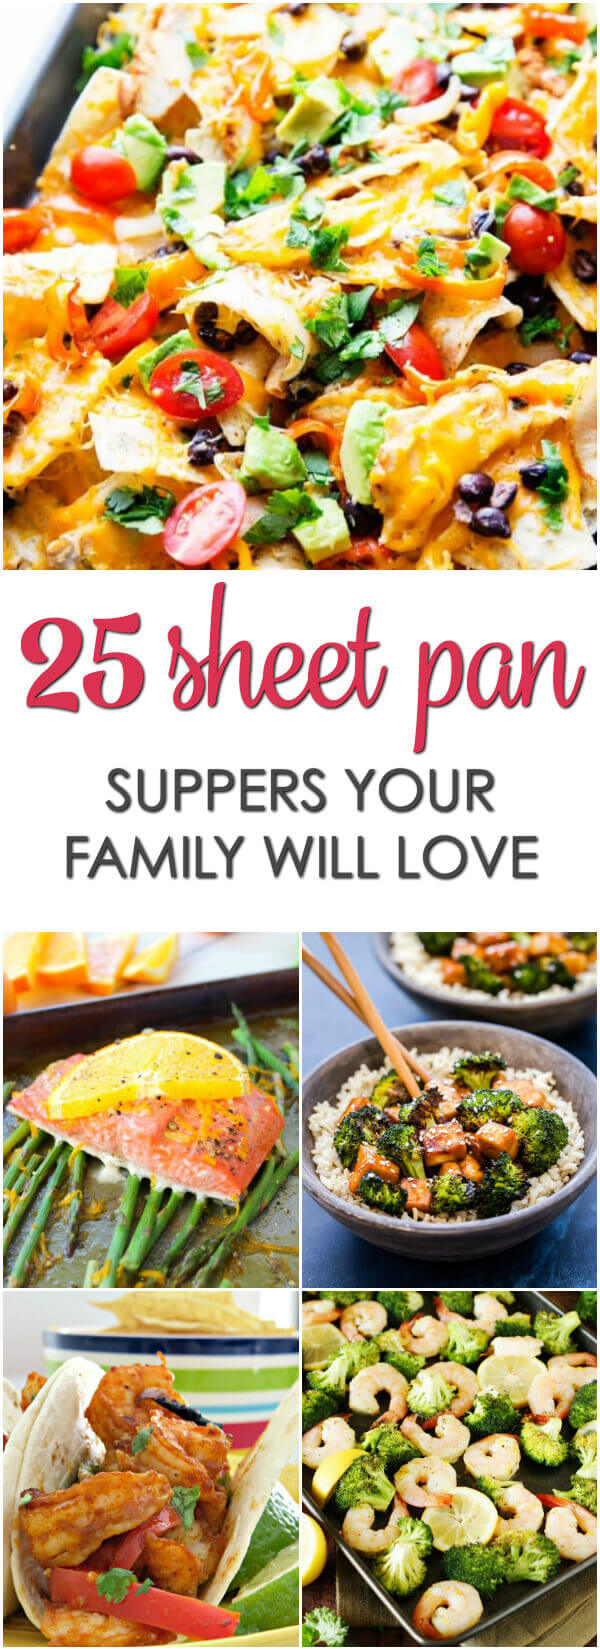 25 Sheet Pan Suppers - 25 easy sheet pan suppers recipes your family is sure to love 